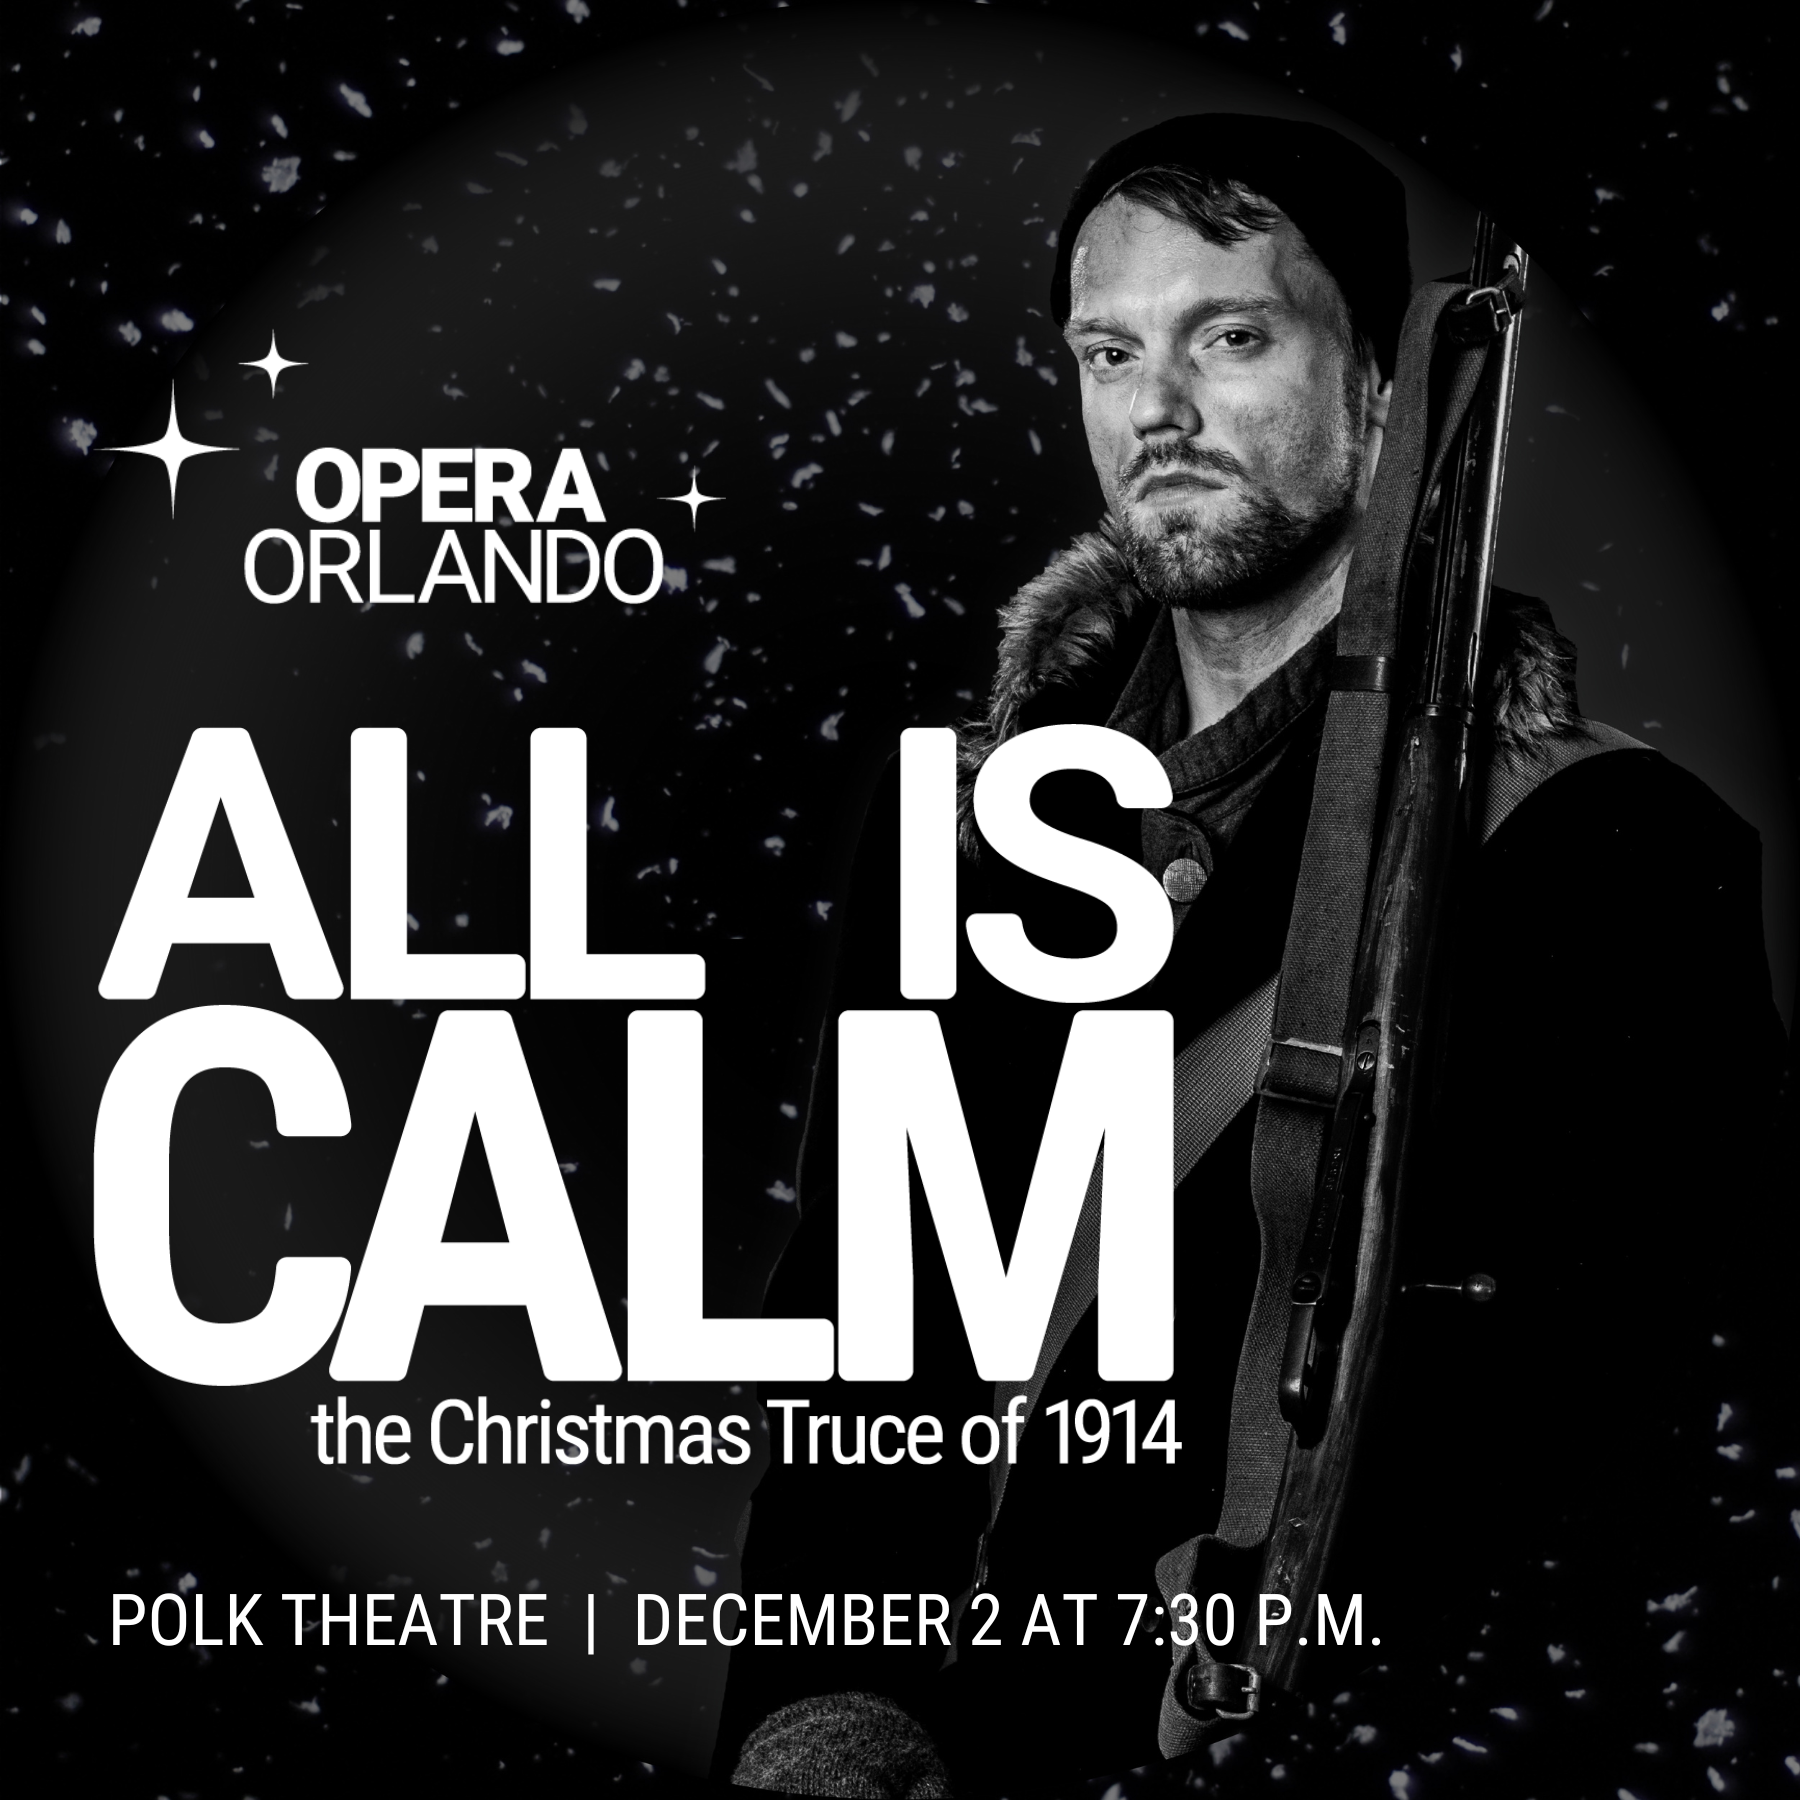 Opera Orlando goes On Tour with its production of the critically-acclaimed All is Calm: the Christmas Truce of 1914. This poignant and moving work retells the historic World War I events of Christmas Eve in 1914 through actual soldiers’ letters and official military correspondence, interwoven with old war songs and carols sung in a capella. Presented at the historic Polk Theatre, famously known as “the jewel of downtown Lakeland.” which will host this one night only performance. Rated PG